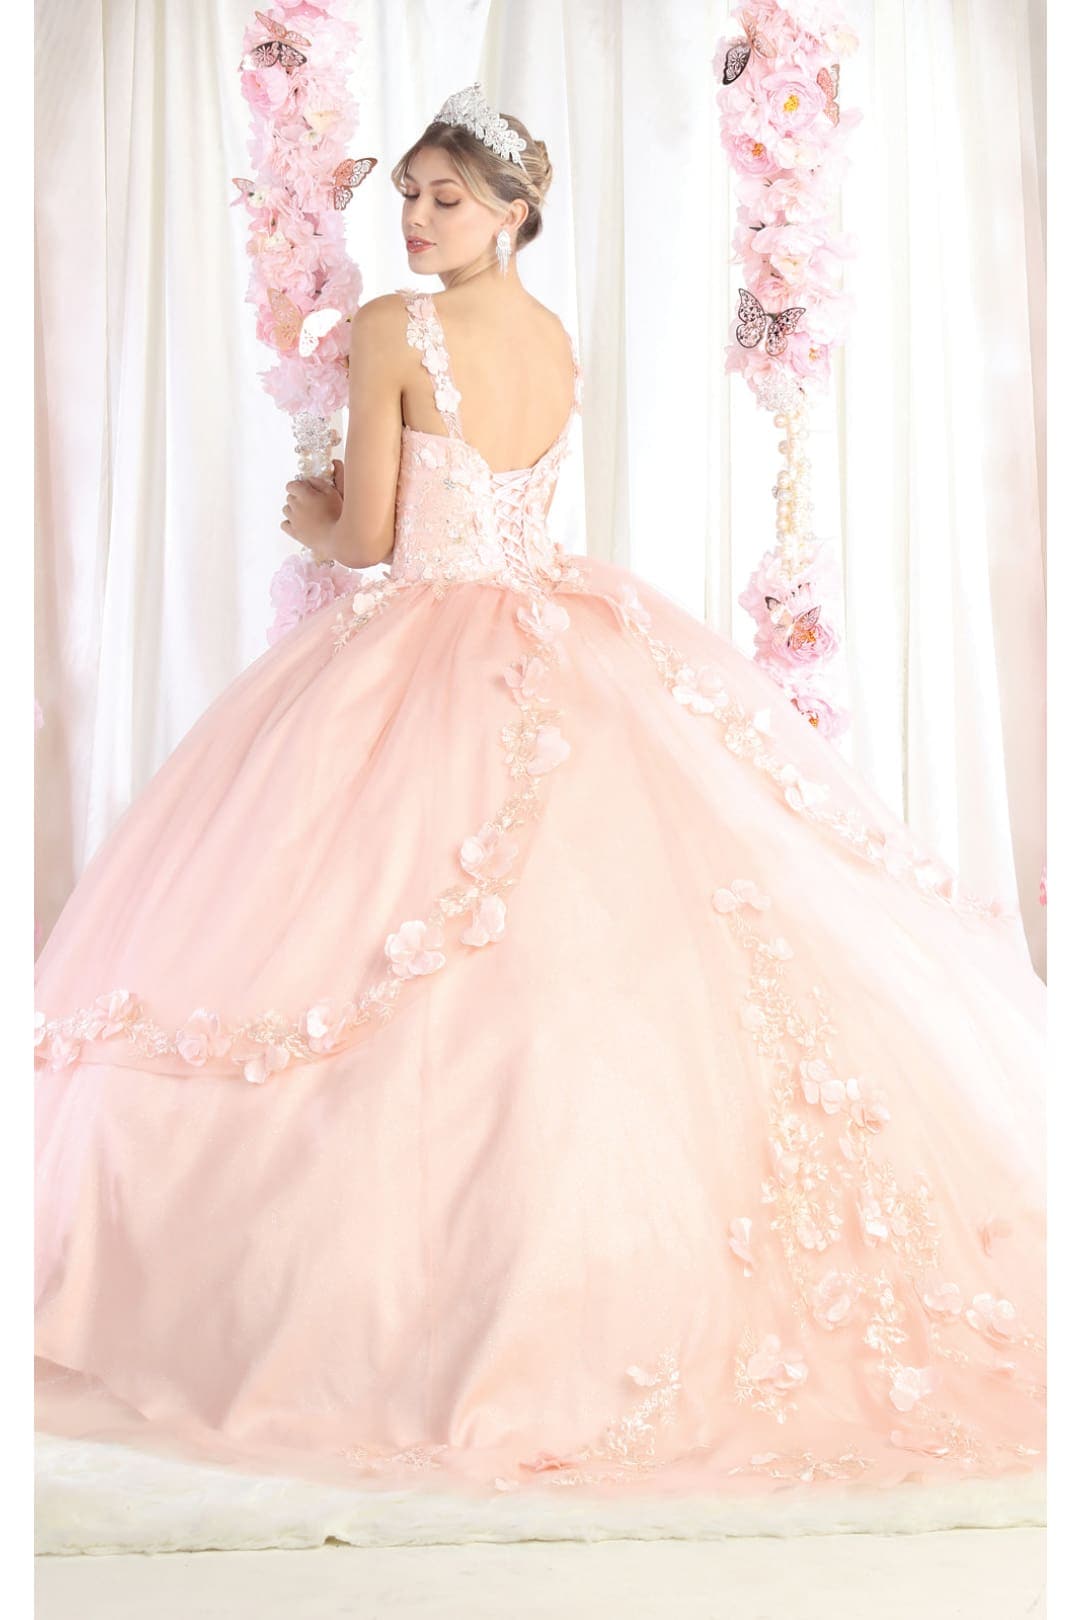 Layla K LK177 Strapless Sweetheart Floral Applique Ball Gown